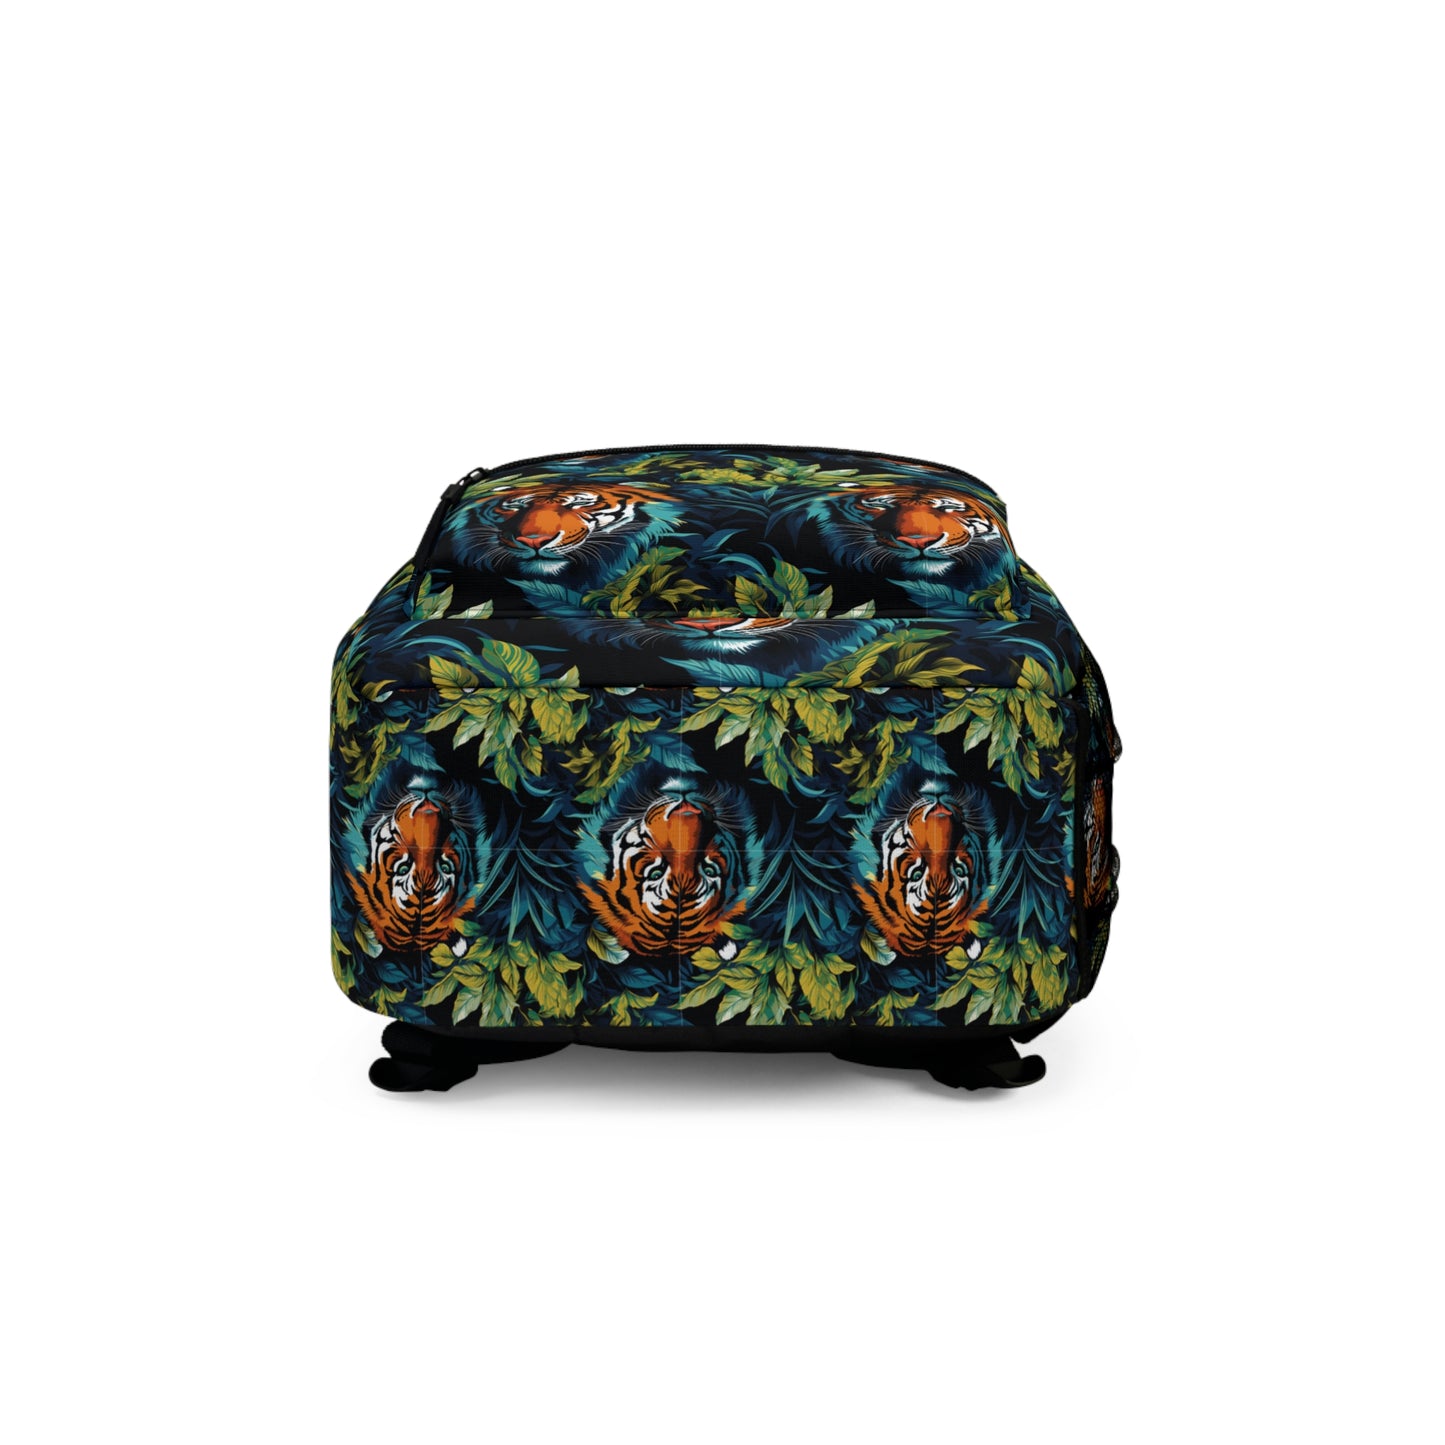 Backpack Tiger in the Jungle Pattern